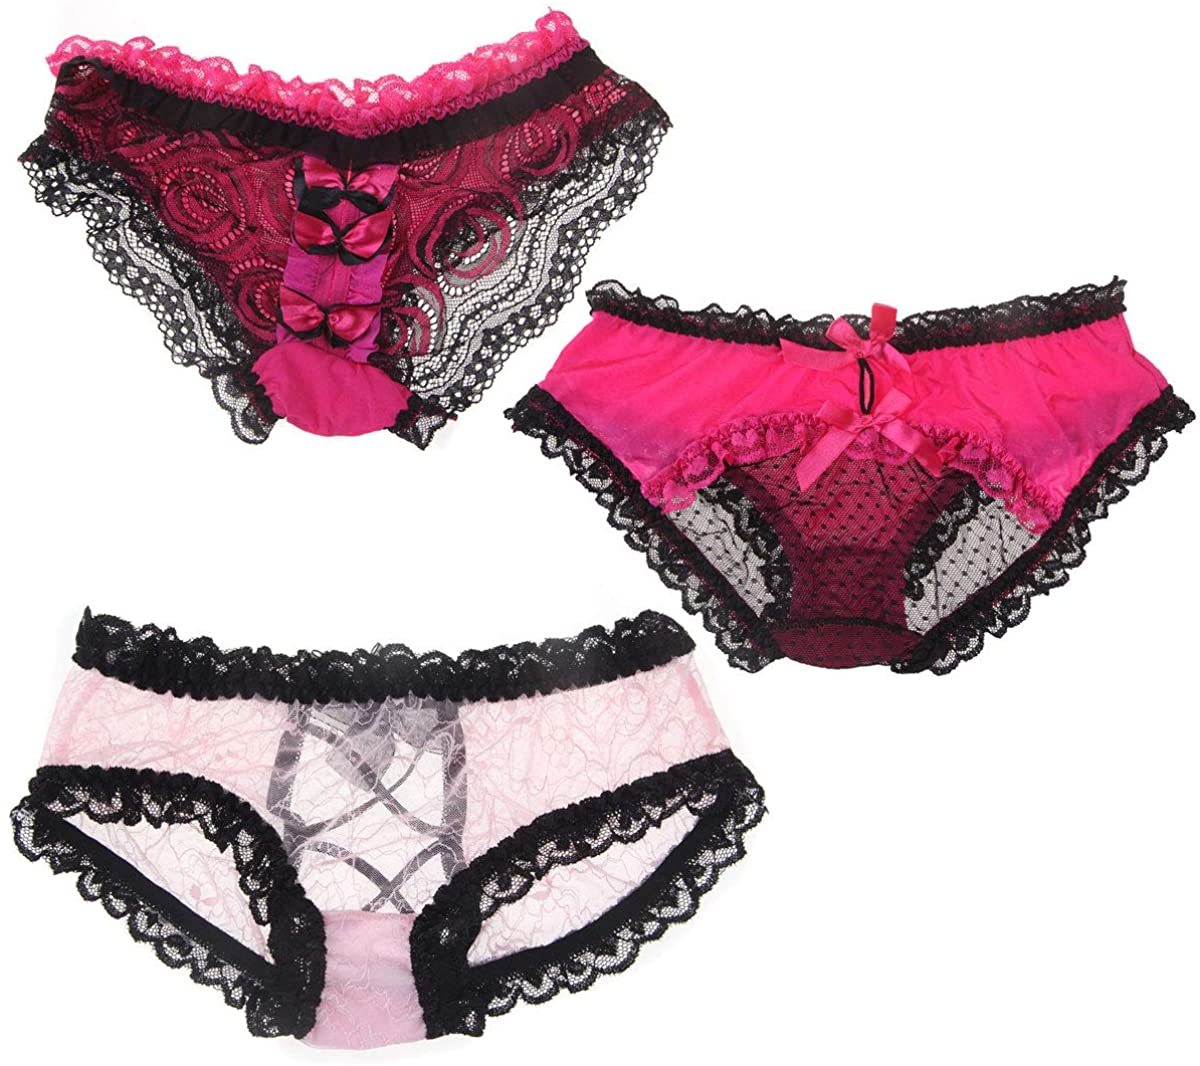 Price:$9.99    ECOSCO Womens Sexy Floral Lace Sheet Soft Hipster Panties Brief Underwear Lingerie Sleepwear (P-3pcs)  Clothing